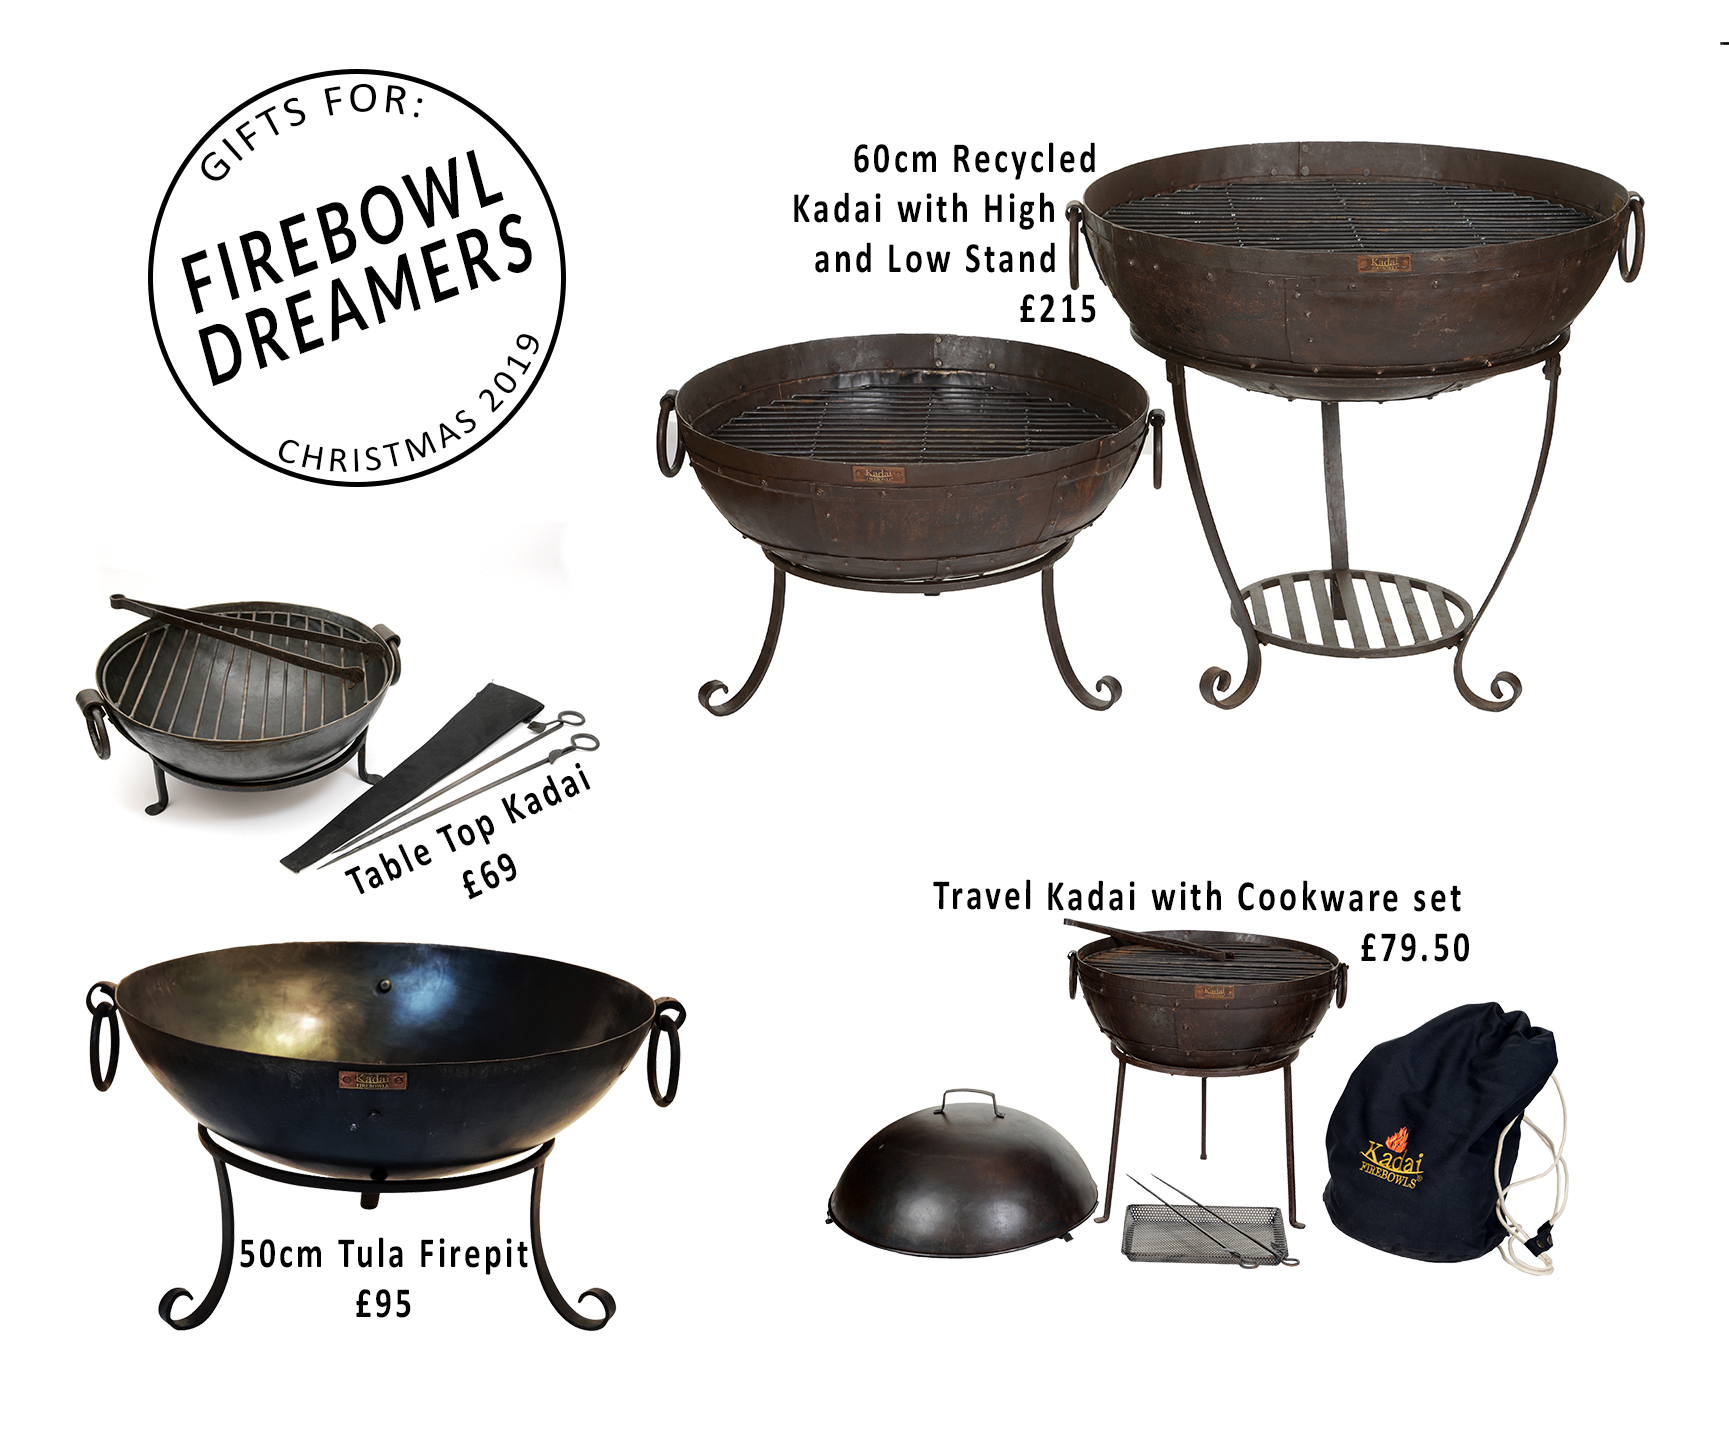 Gift_guide___firebowl_dreamers